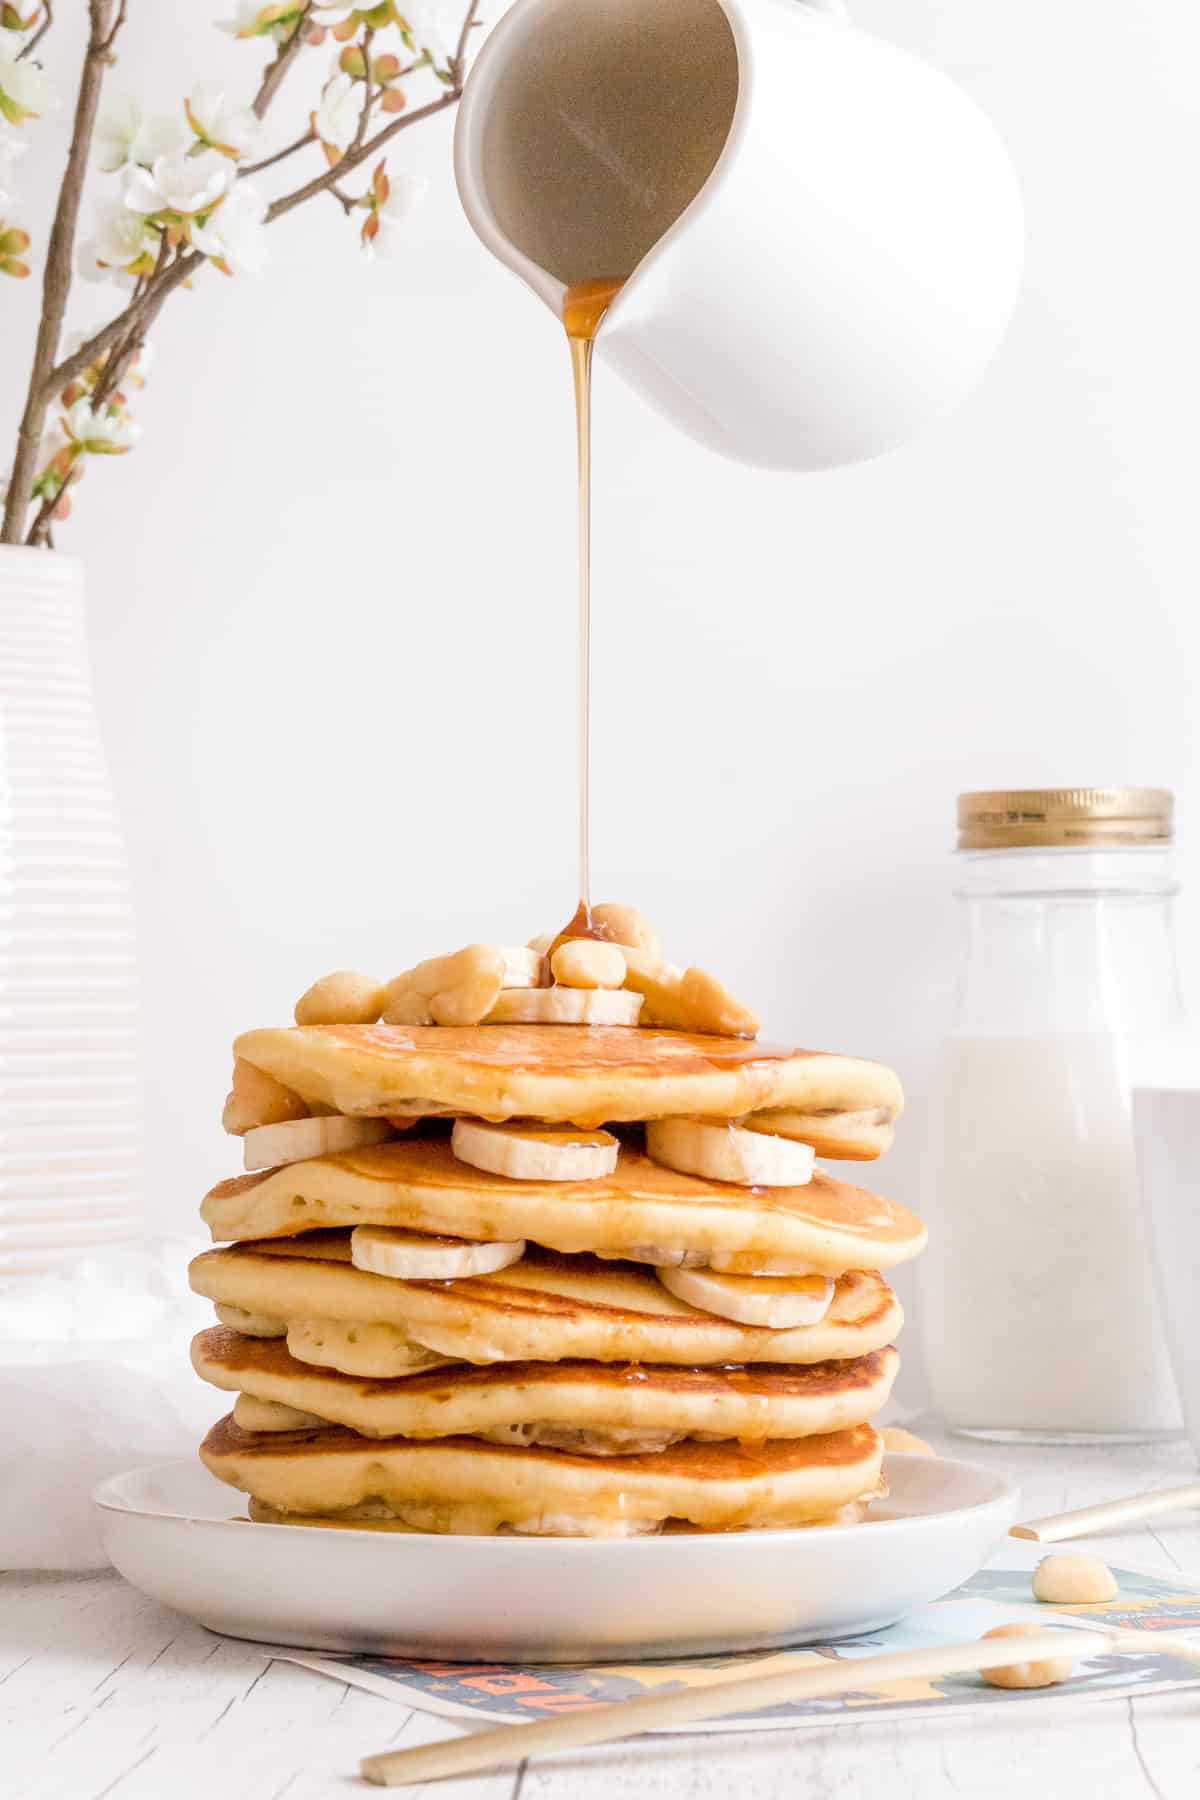 pouring maple syrup over a stack of banana macadamia nut pancakes.